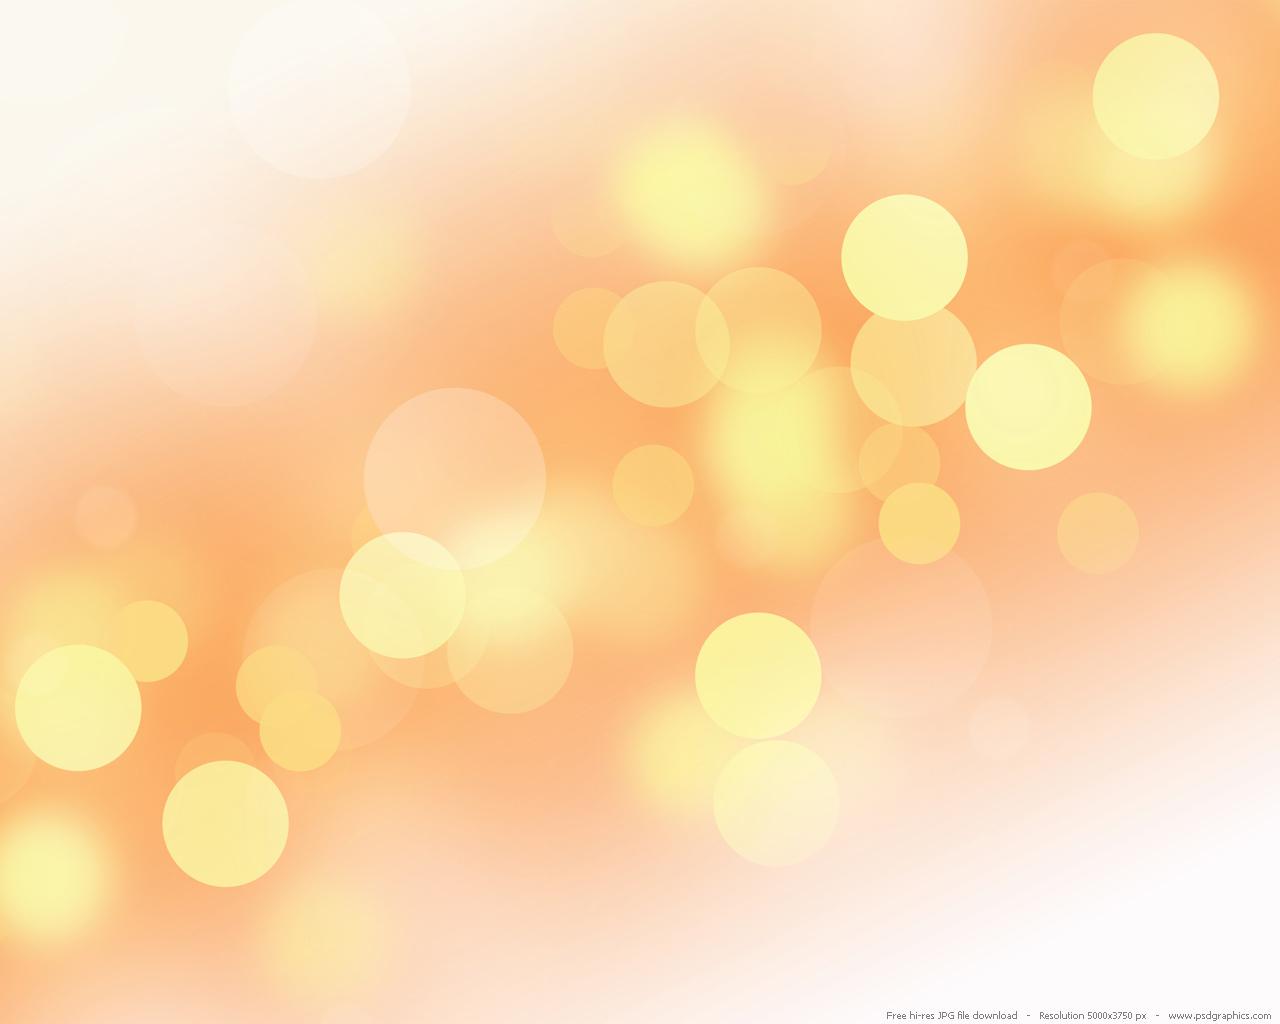 Free download Soft yellow background psdgraphics Black Background